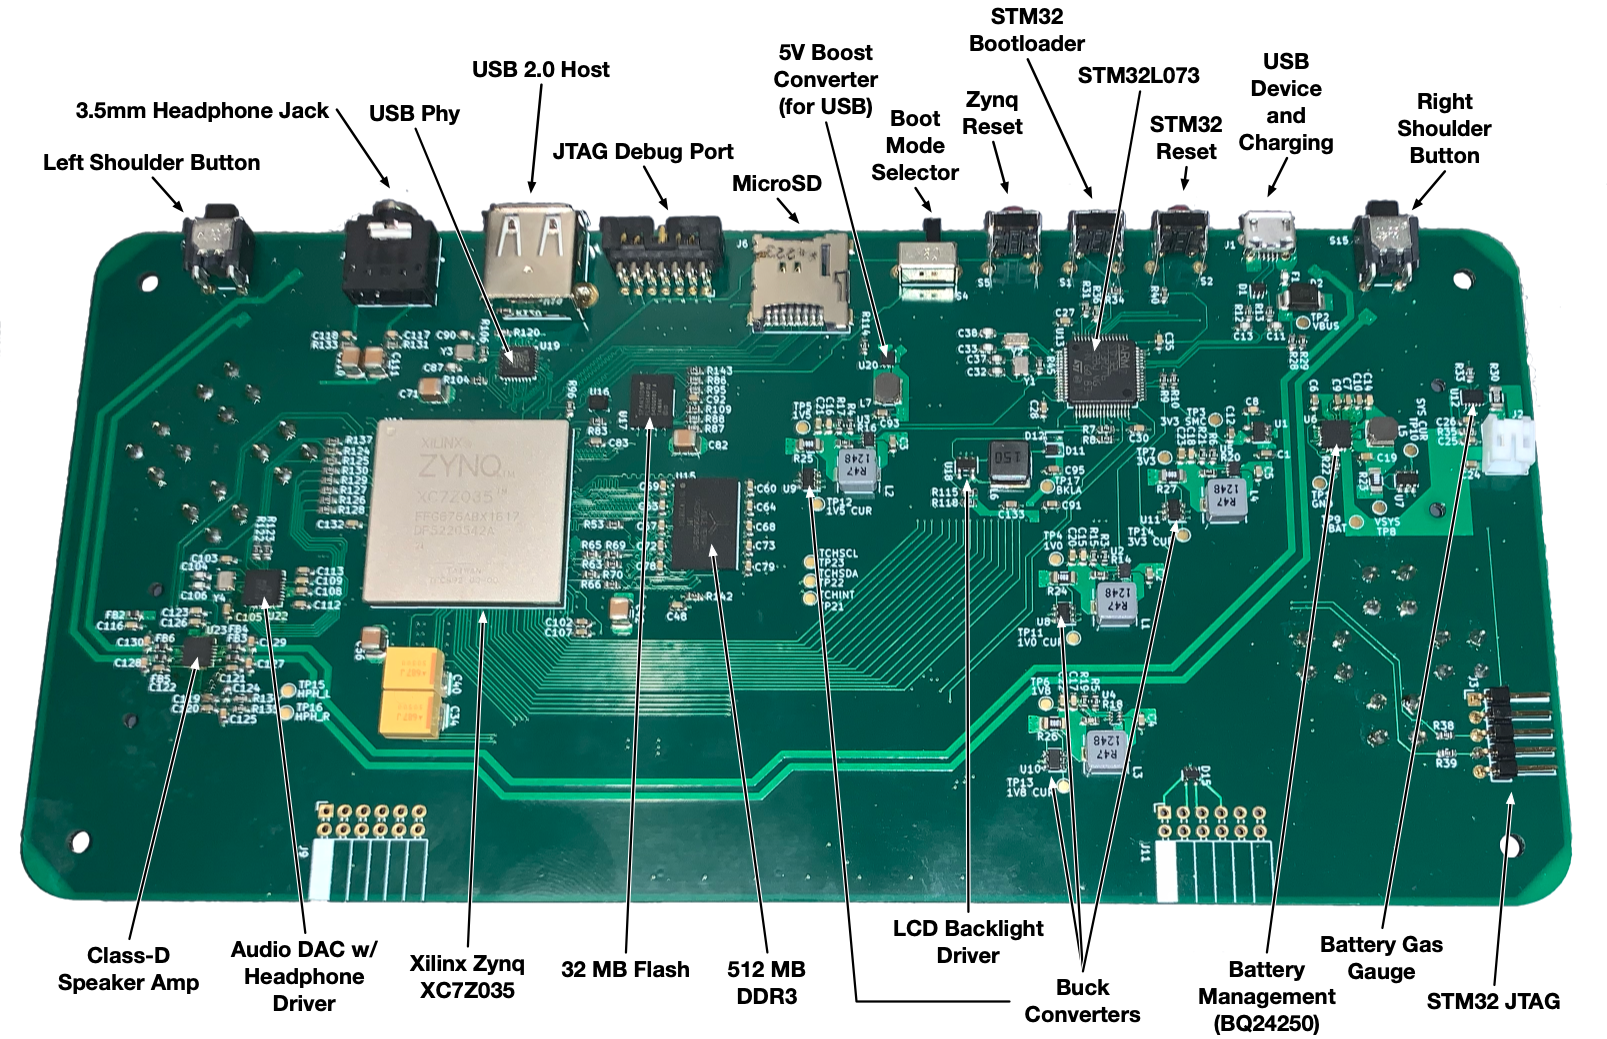 Diagram of the Gameslab PCB with all major components labeled